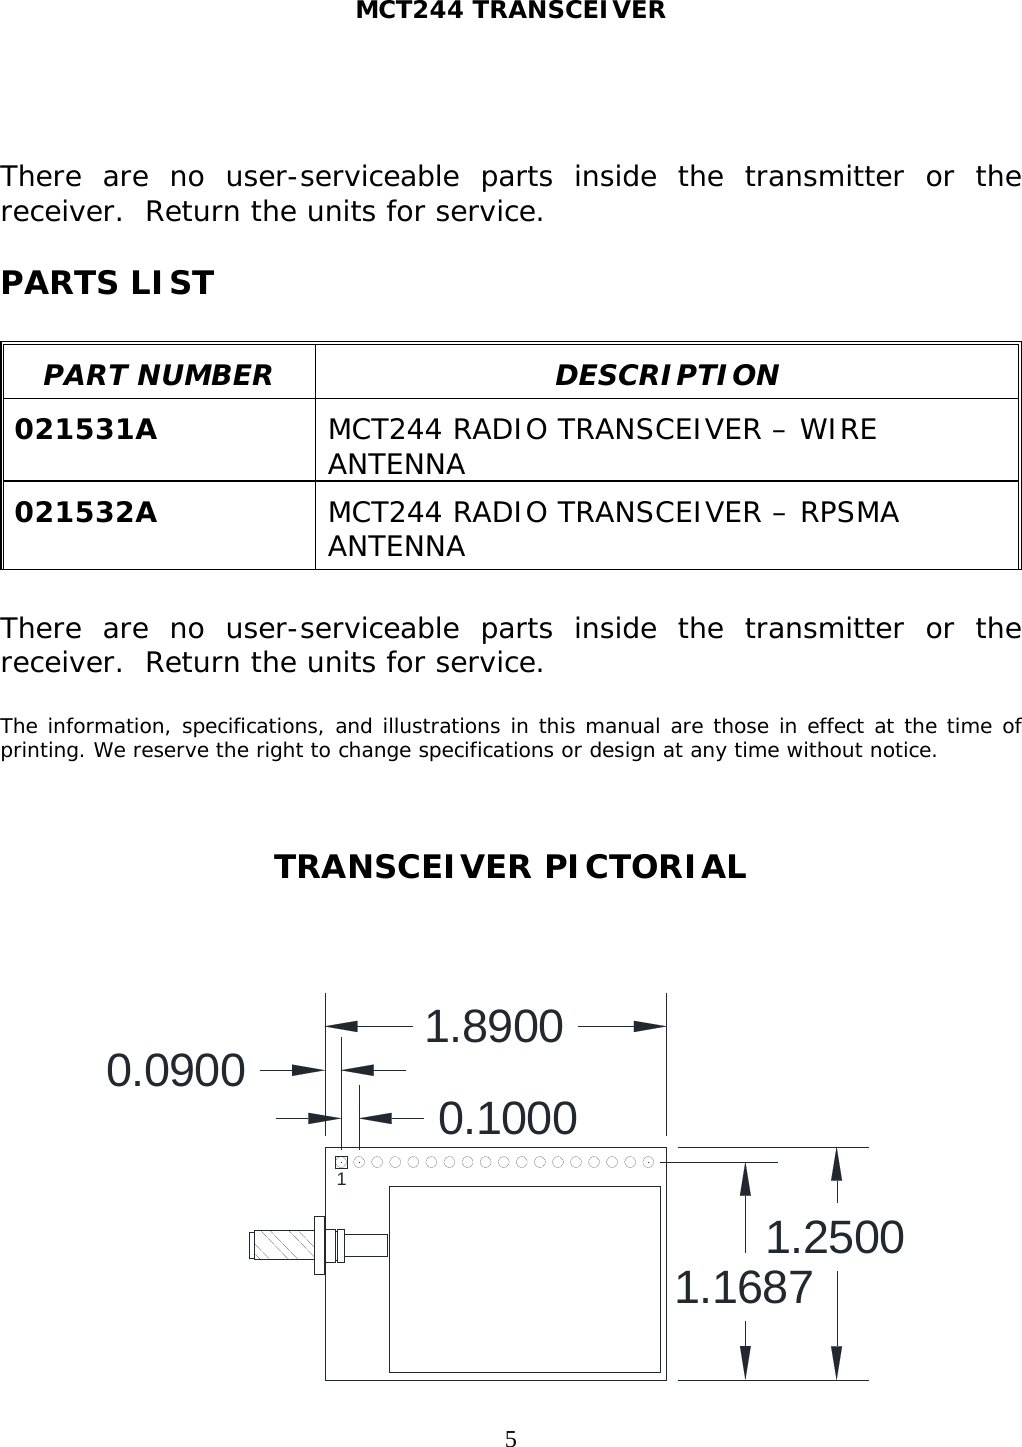 MCT244 TRANSCEIVER  5  There are no user-serviceable parts inside the transmitter or the receiver.  Return the units for service.  PARTS LIST    PART NUMBER  DESCRIPTION  021531A  MCT244 RADIO TRANSCEIVER – WIRE ANTENNA  021532A  MCT244 RADIO TRANSCEIVER – RPSMA ANTENNA   There are no user-serviceable parts inside the transmitter or the receiver.  Return the units for service.  The information, specifications, and illustrations in this manual are those in effect at the time of printing. We reserve the right to change specifications or design at any time without notice.    TRANSCEIVER PICTORIAL    1.89001.25001.16870.0900 0.10001